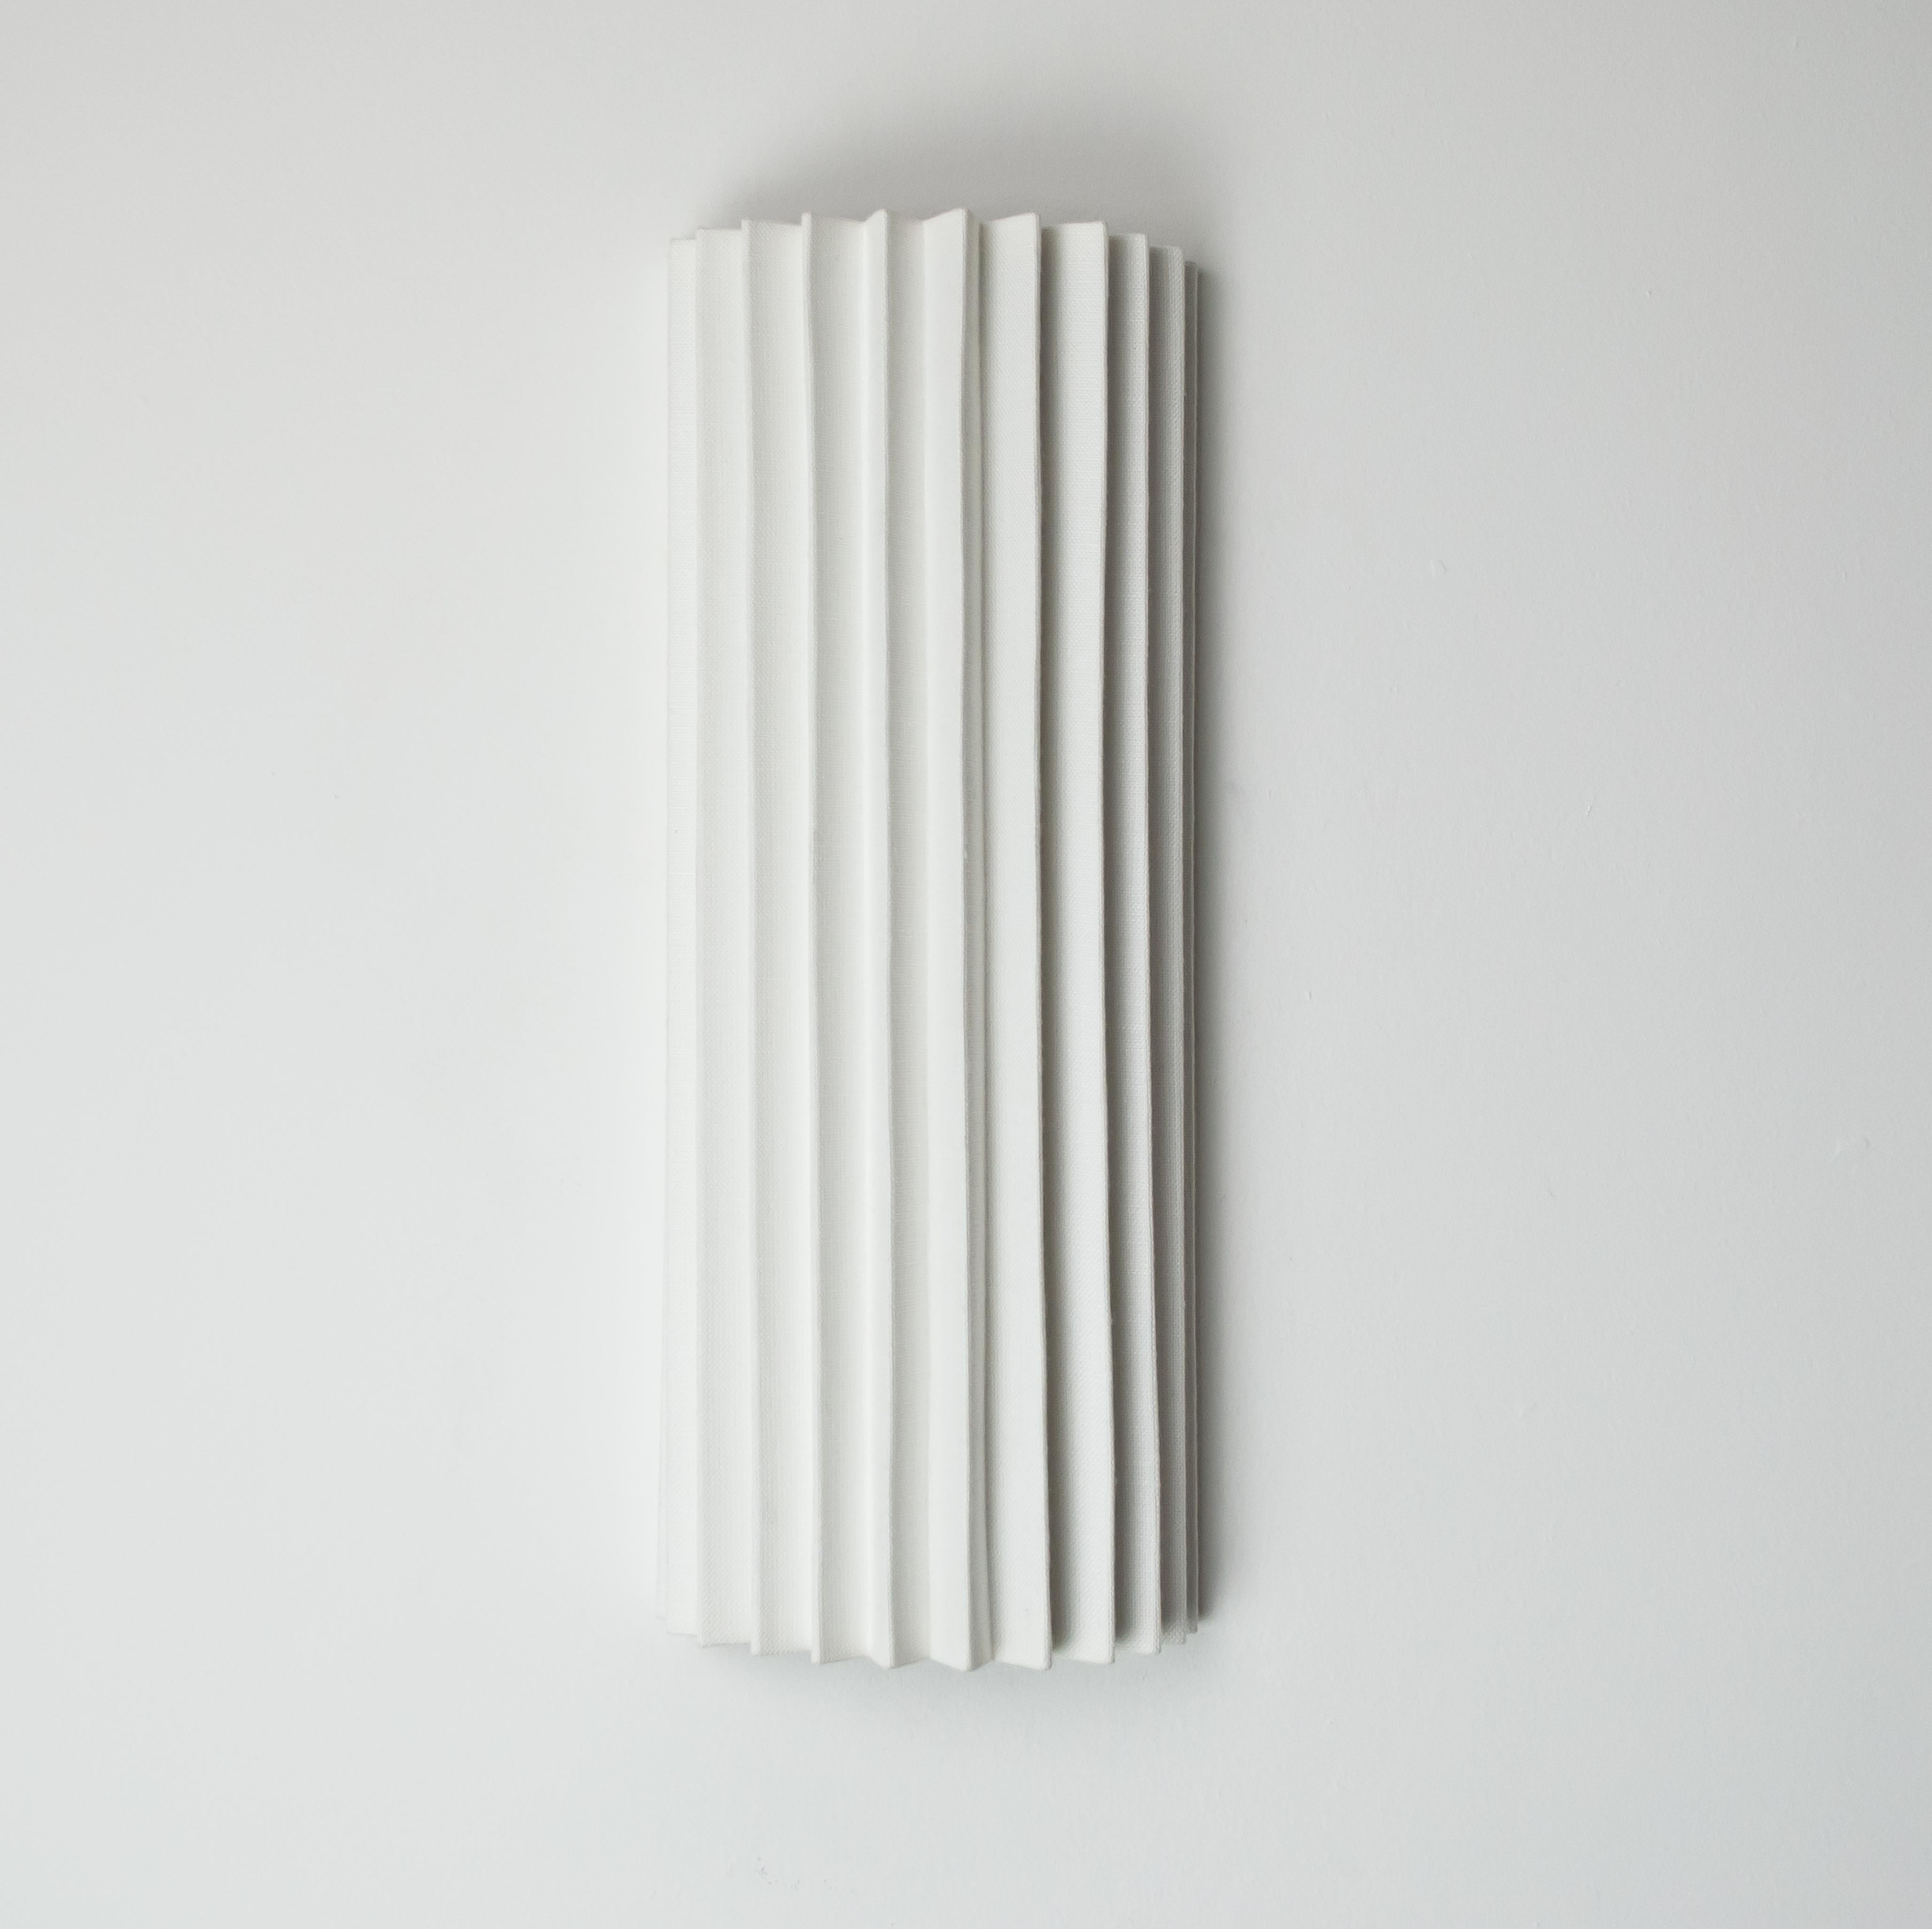 Limited edition handmade Pleated Wall Light.  The white linen gives the light a soft glow and the delicate shape of the light is carefully fitted around a brushed stainless steel armature that holds each pleat in position.  The simple geometric